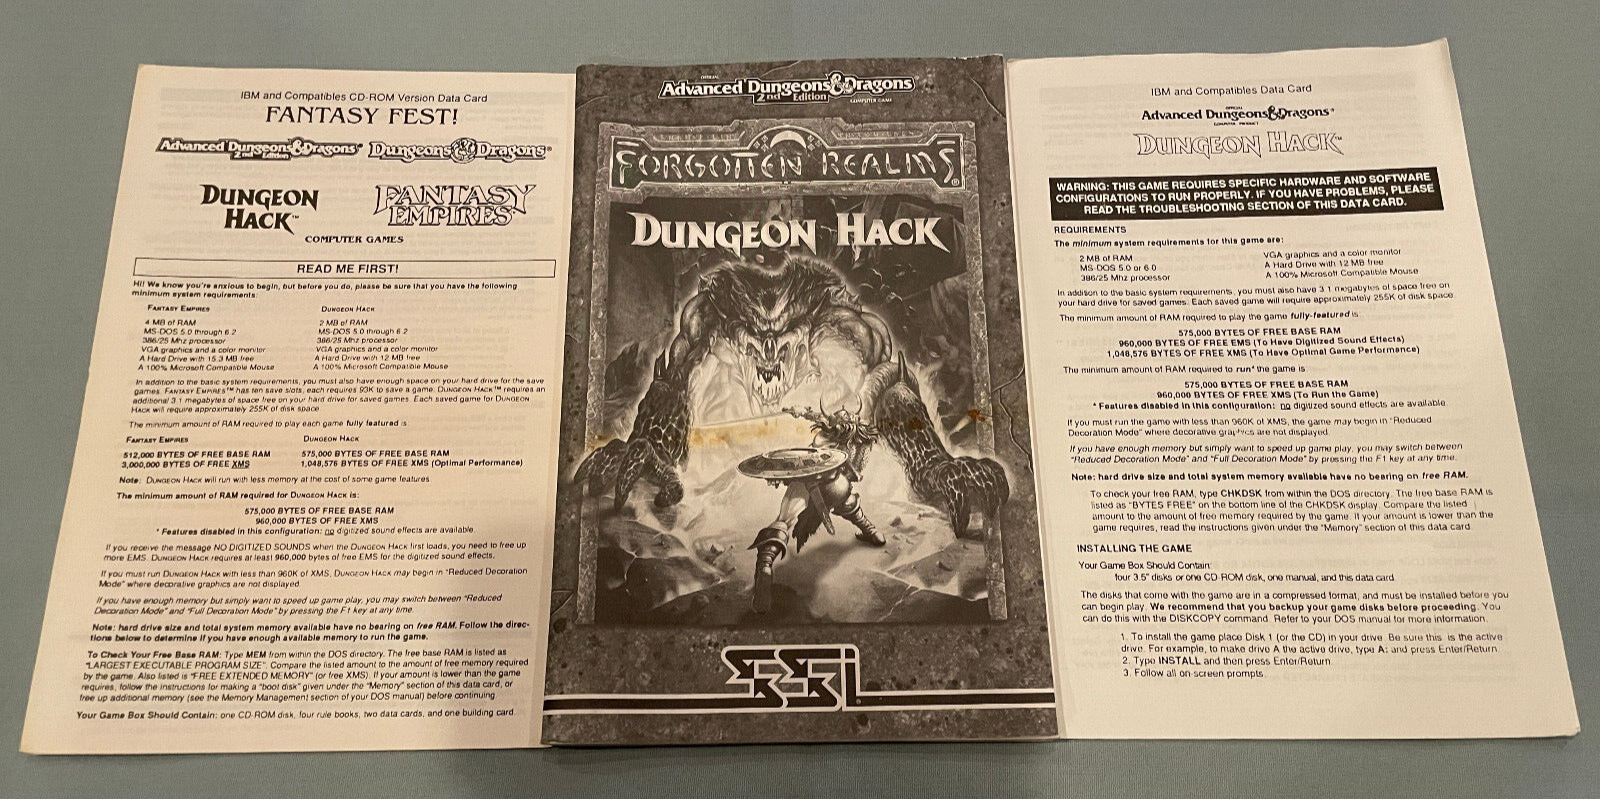 Dungeon Hack AD&D Forgotten Realms Computer Software Manual/Docs ONLY - NO GAME